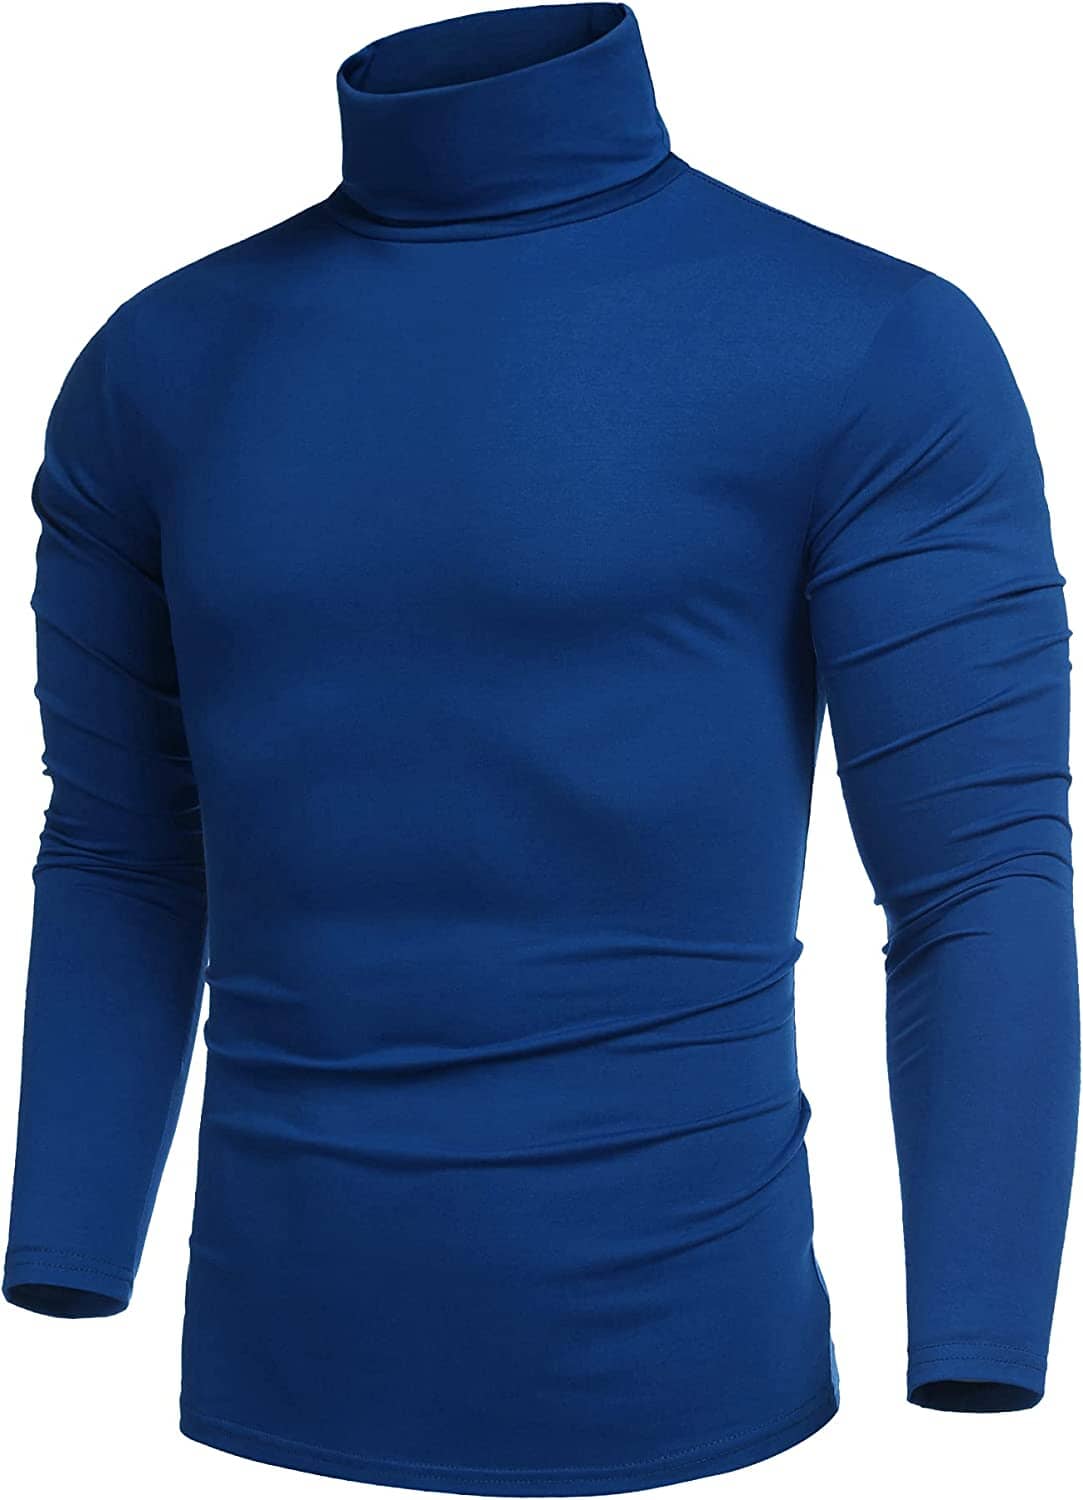 Slim Fit Turtleneck Basic Cotton Sweater (US Only) Sweaters COOFANDY Store Royal Blue S 